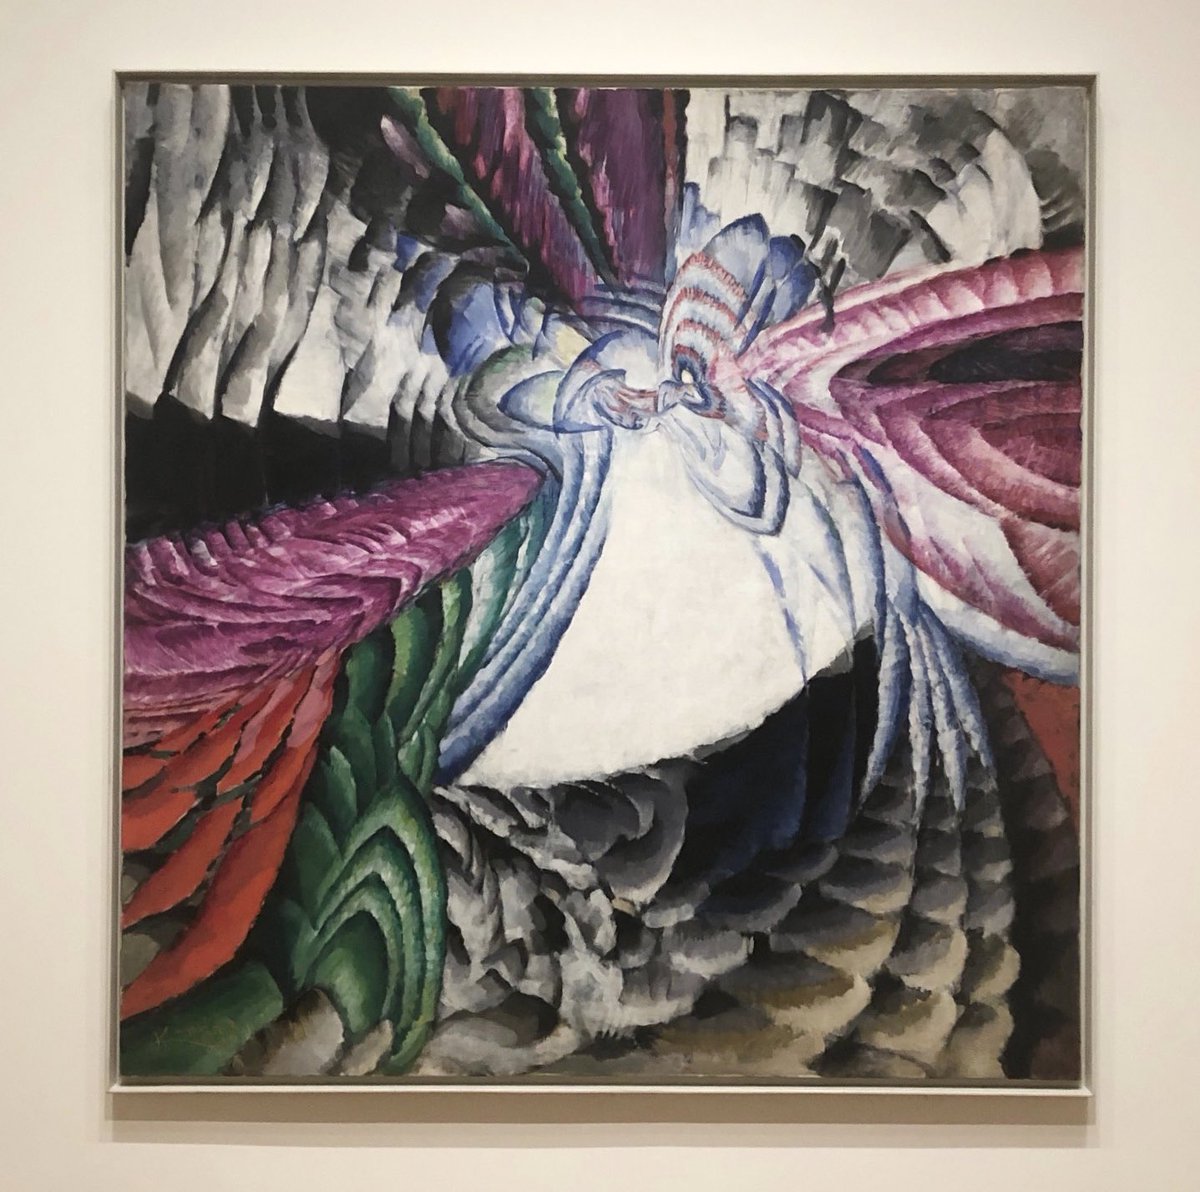 František Kupka was one of the earliest modern artists to fully embrace abstraction. “Localization of Graphic Motifs II” (1912/1913) shows swirling geometric forms that are devoid of any references to material objects.